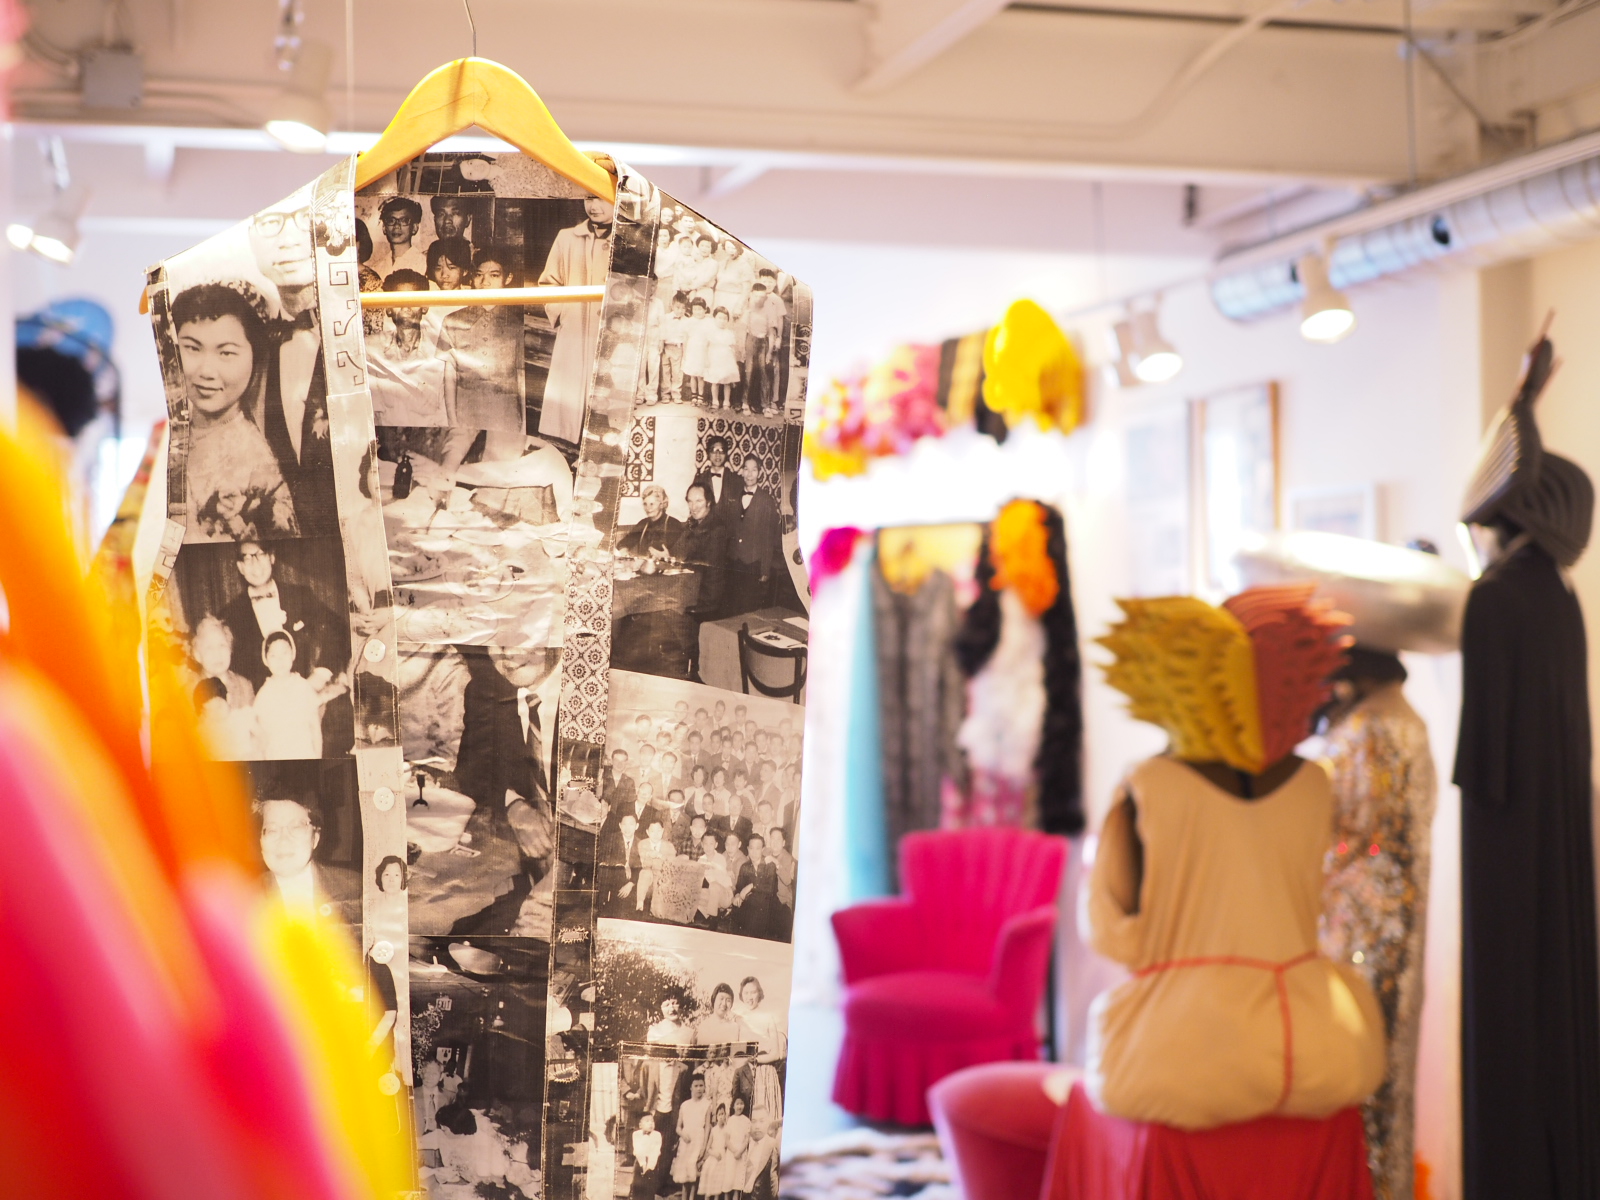 Invisible Identities: a waiter's vest made out of paper with black and white Kwan family photos hangs among colour clothing and artifacts from China Doll's apartment